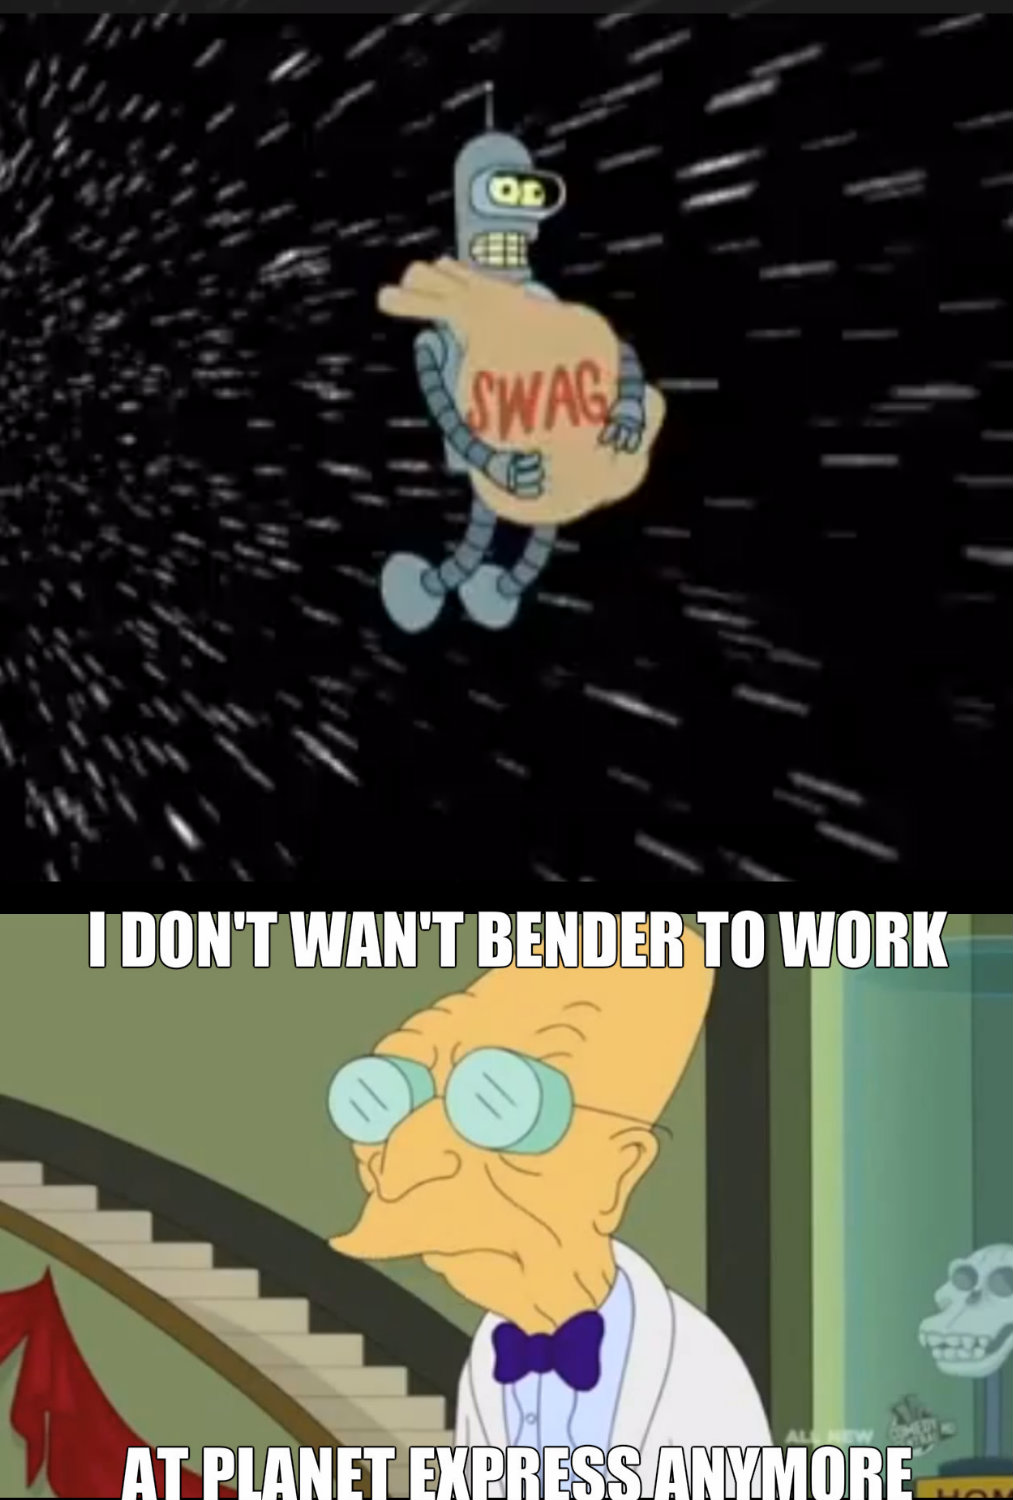 Bender was my favoirte character until this, now it's ZOIDBERG (/)(;,,;)(/) - meme